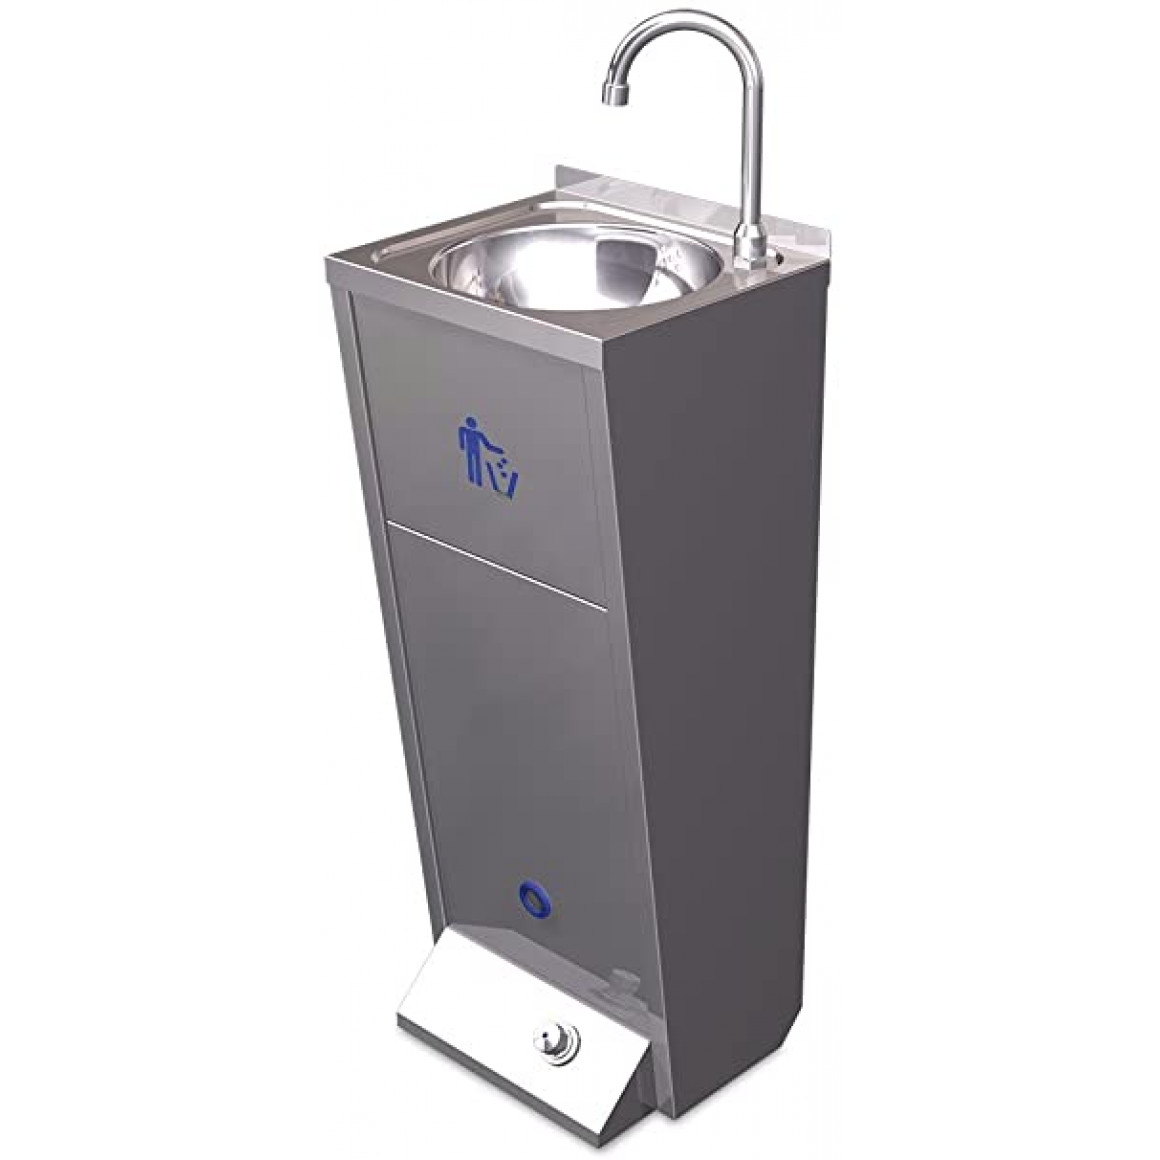 Hand wash basin XS model with removable door